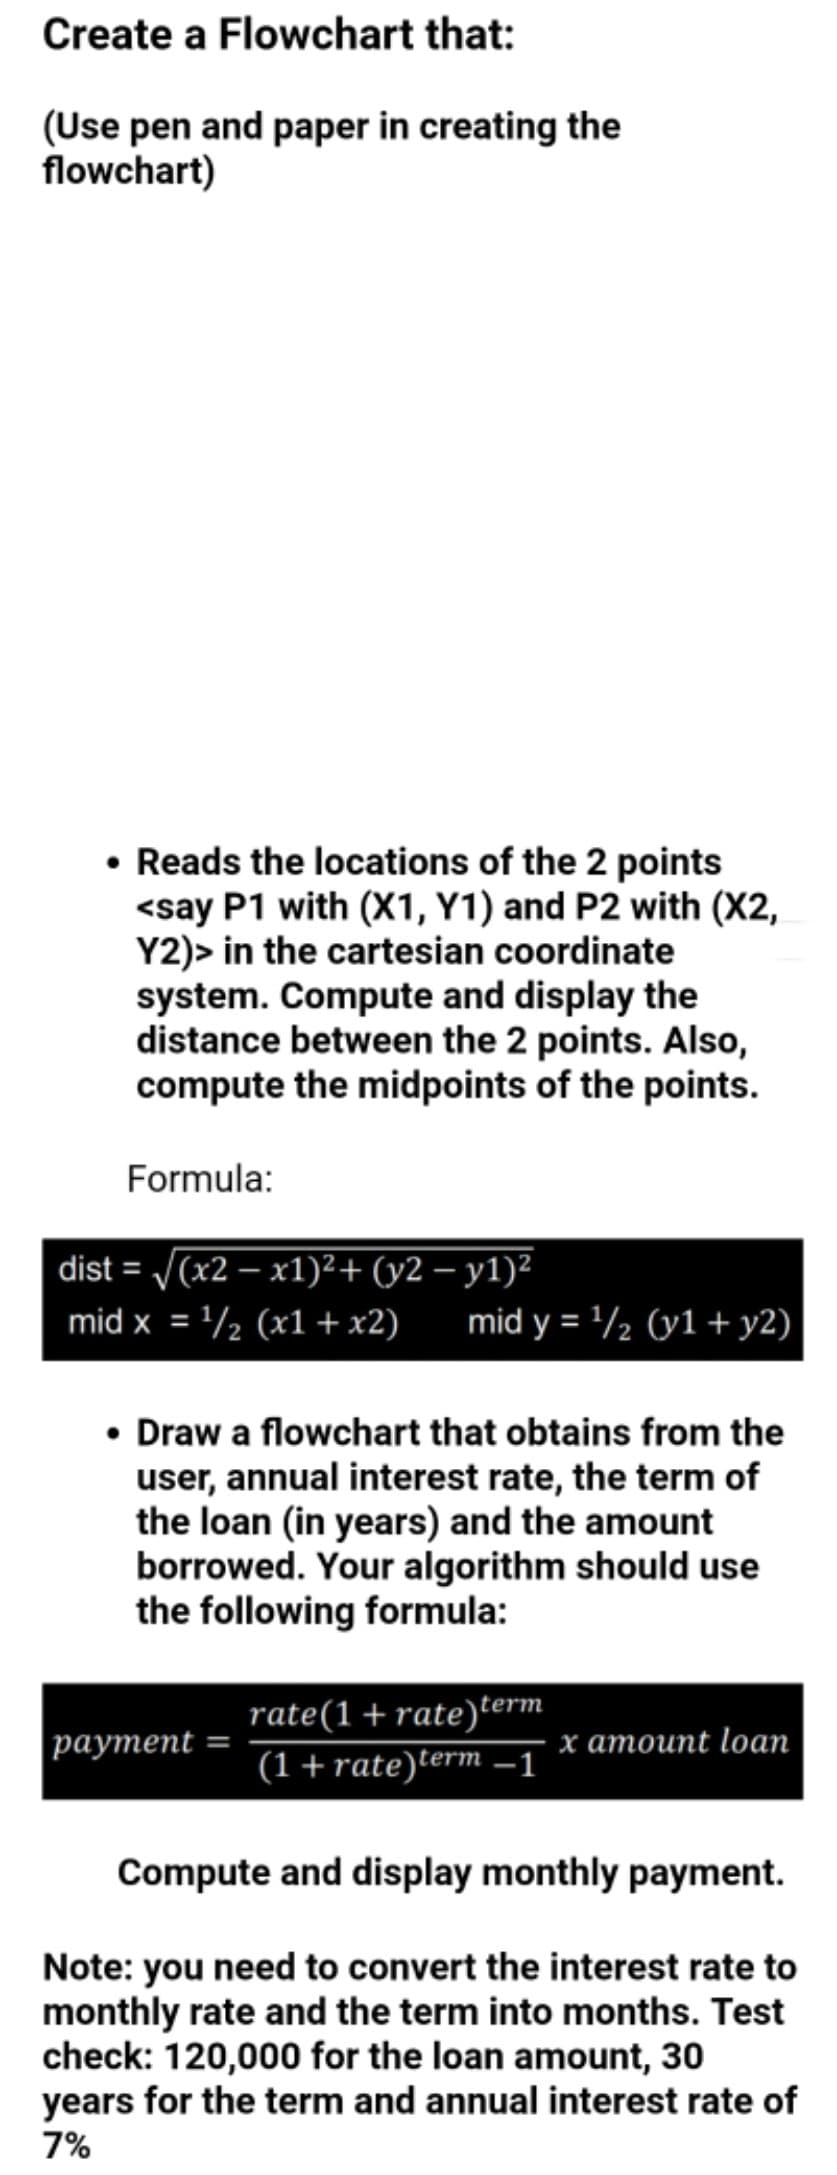 Create a Flowchart that:
(Use pen and paper in creating the
flowchart)
Reads the locations of the 2 points
<say P1 with (X1, Y1) and P2 with (X2,
Y2)> in the cartesian coordinate
system. Compute and display the
distance between the 2 points. Also,
compute the midpoints of the points.
Formula:
dist = V(x2 – x1)²+ (y2 – y1)²
mid x = '/½ (x1 +x2)
mid y = '/½ (y1+ y2)
• Draw a flowchart that obtains from the
user, annual interest rate, the term of
the loan (in years) and the amount
borrowed. Your algorithm should use
the following formula:
rate(1+rate)term
(1+rate)term –1
раутеnt
х атоиnt loaп
Compute and display monthly payment.
Note: you need to convert the interest rate to
monthly rate and the term into months. Test
check: 120,000 for the loan amount, 30
years for the term and annual interest rate of
7%
